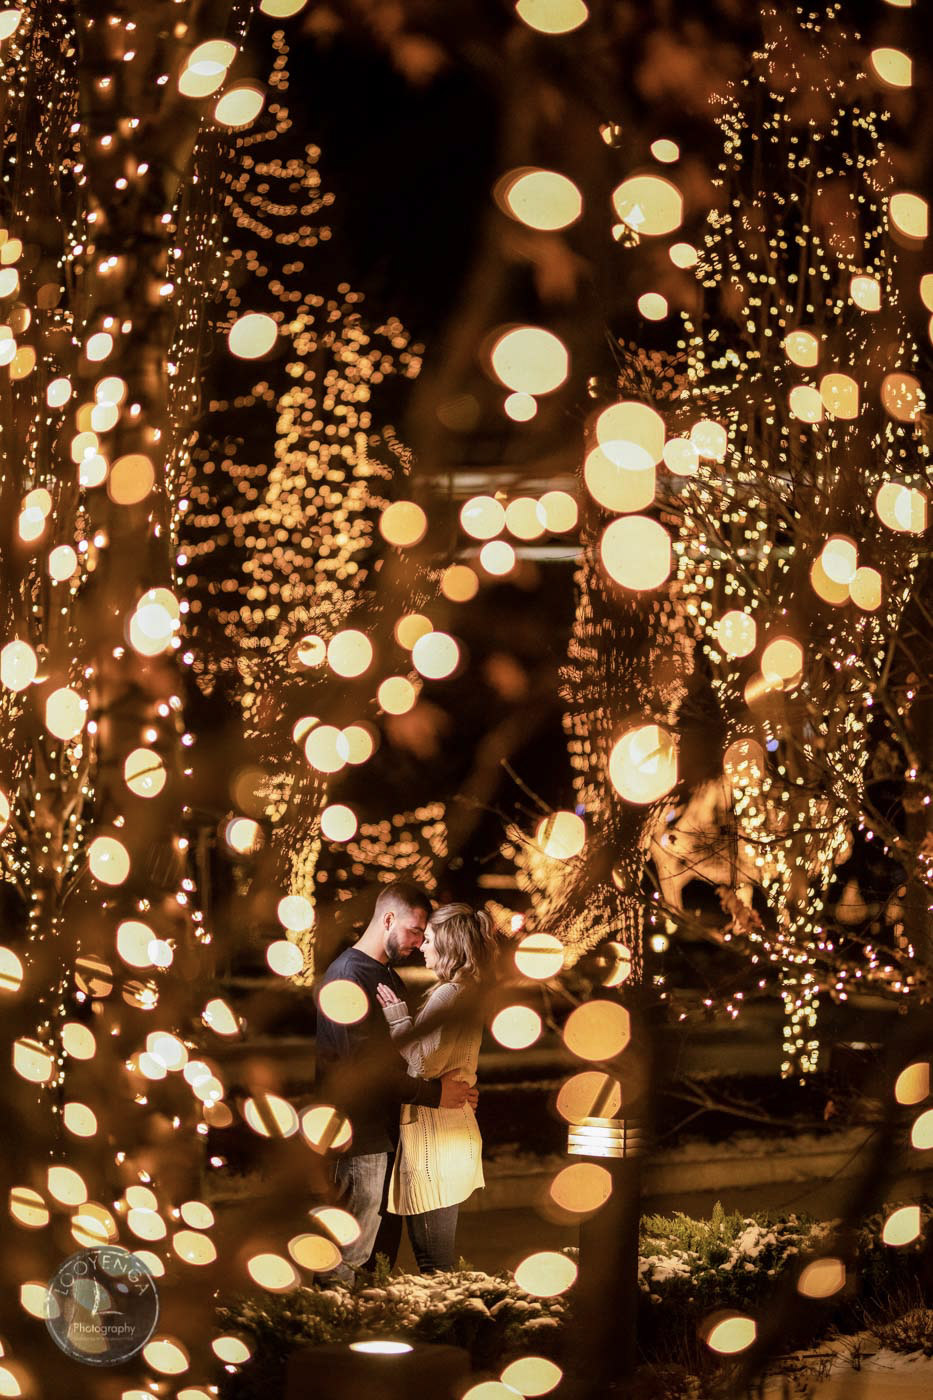 couples embracing each other between trees decorated with lights